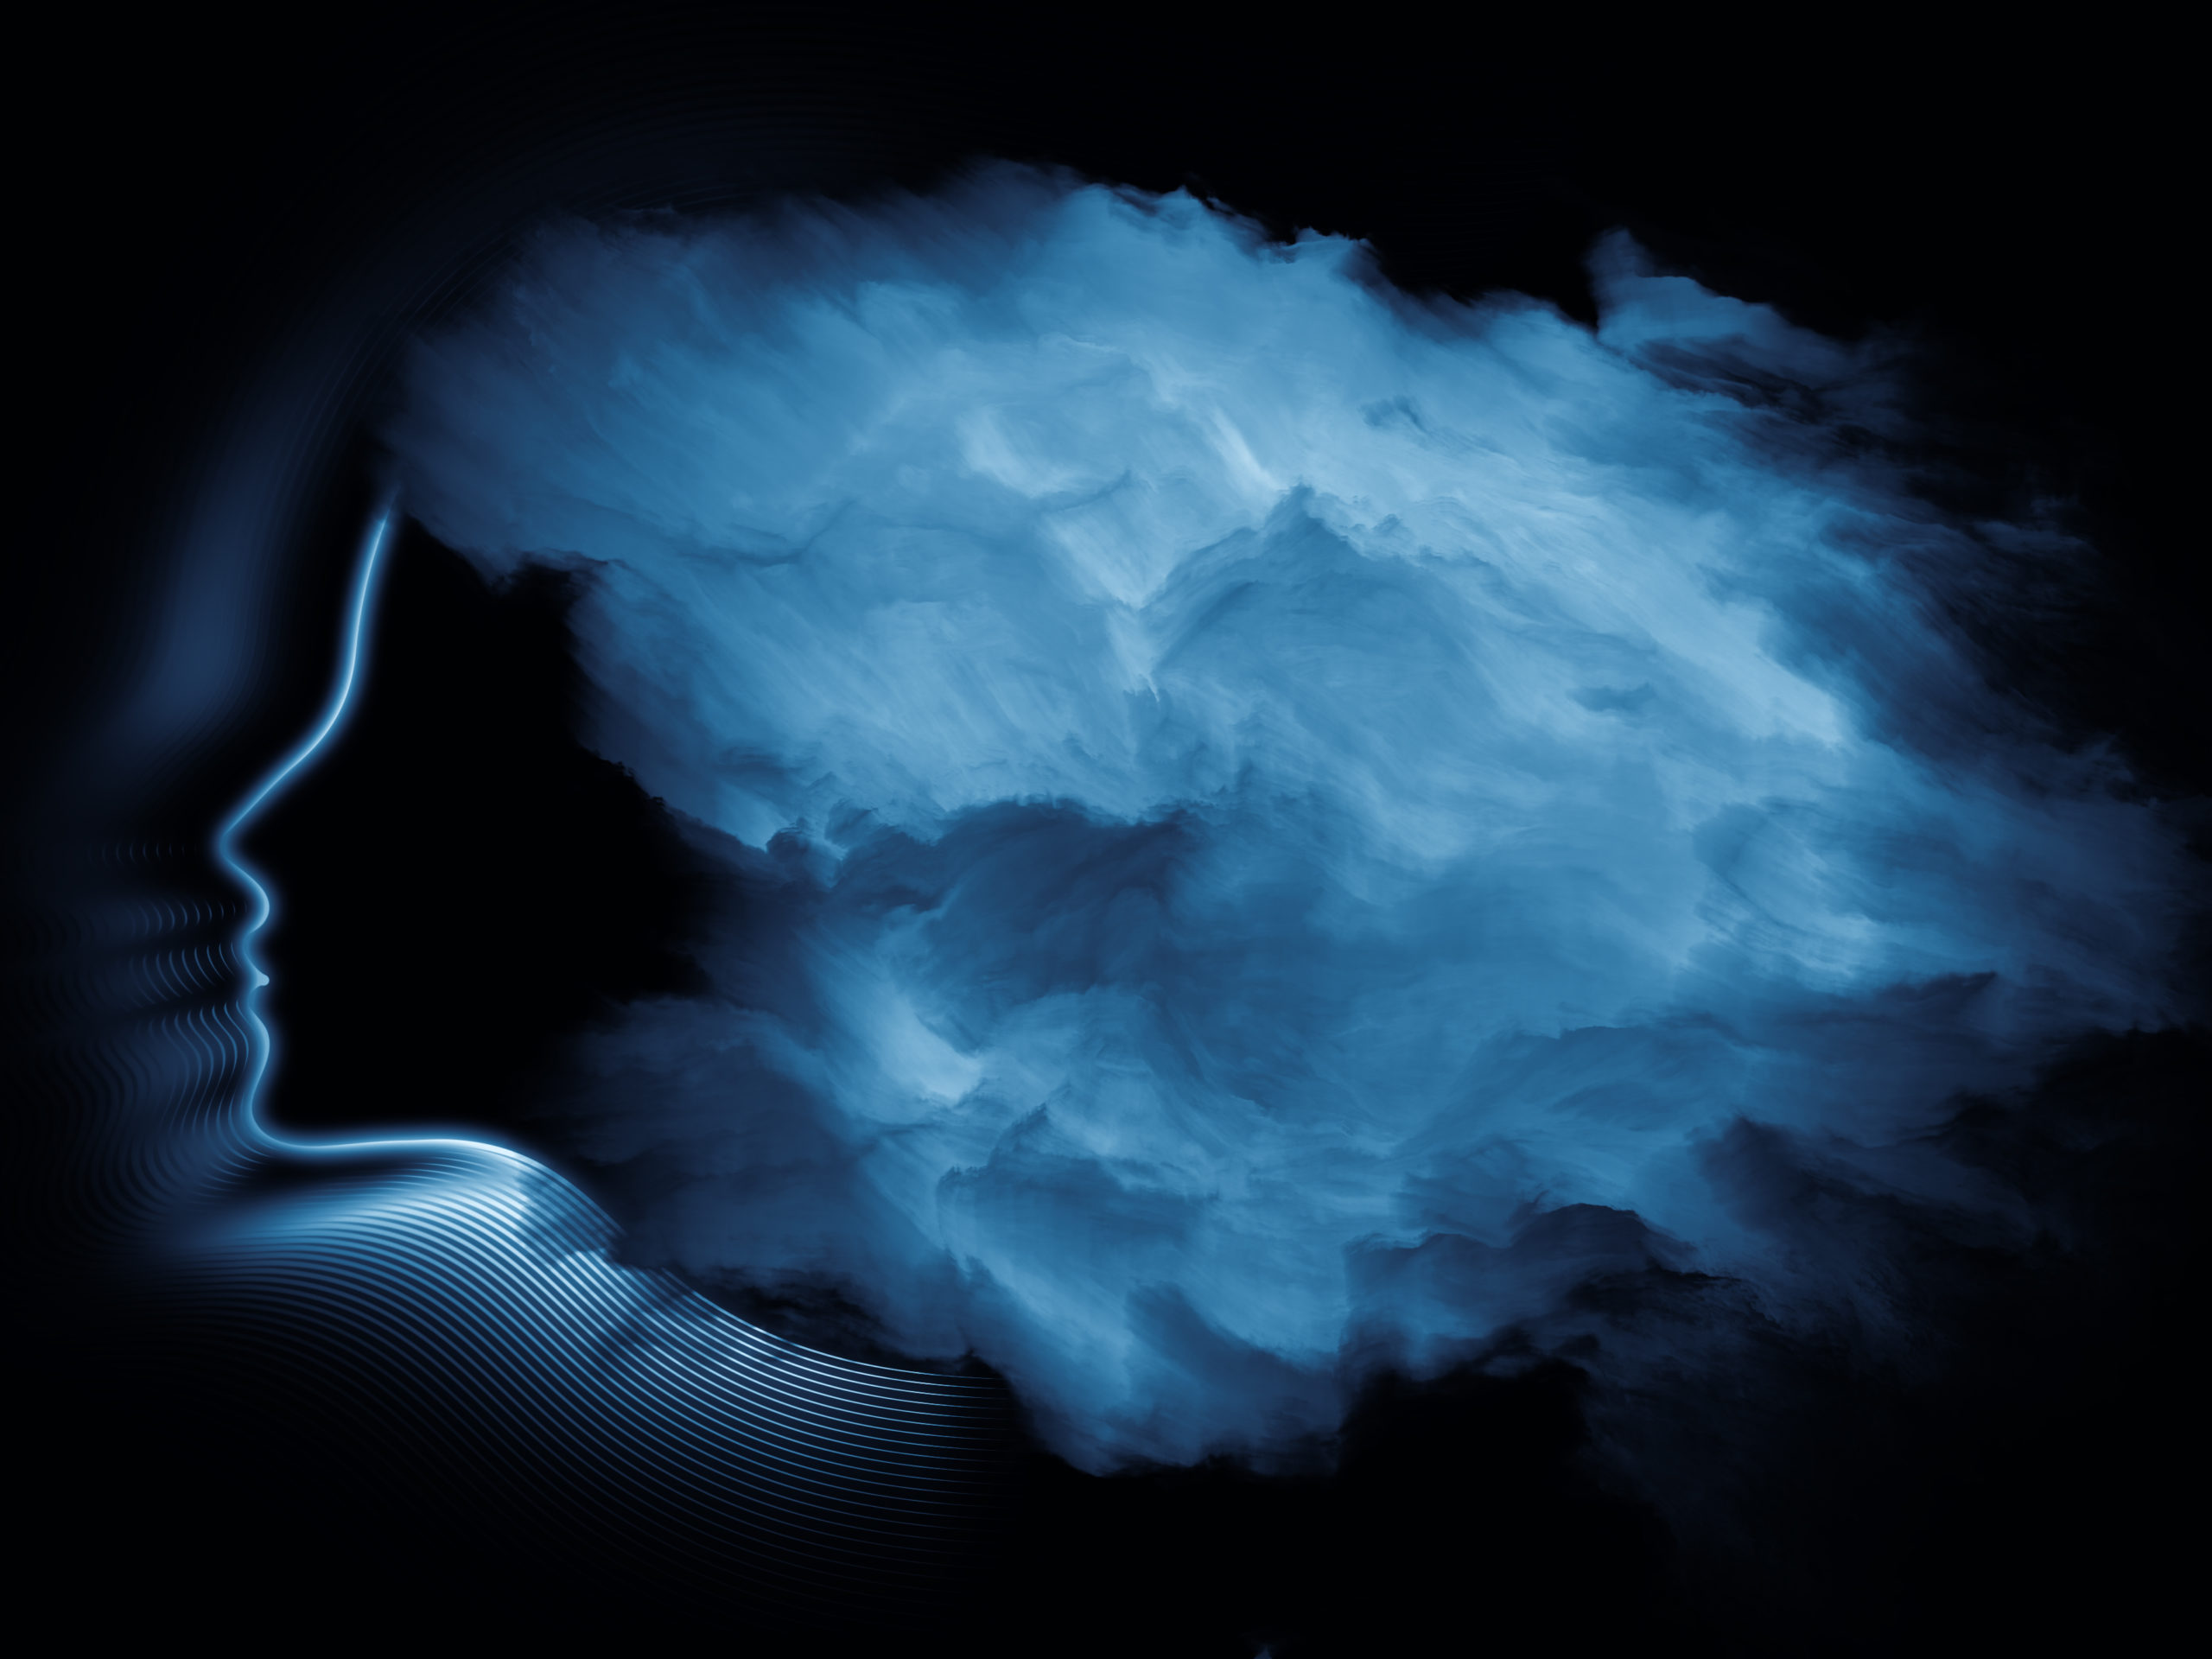 A graphical image of a profile of a woman's face with blue fog around her head.